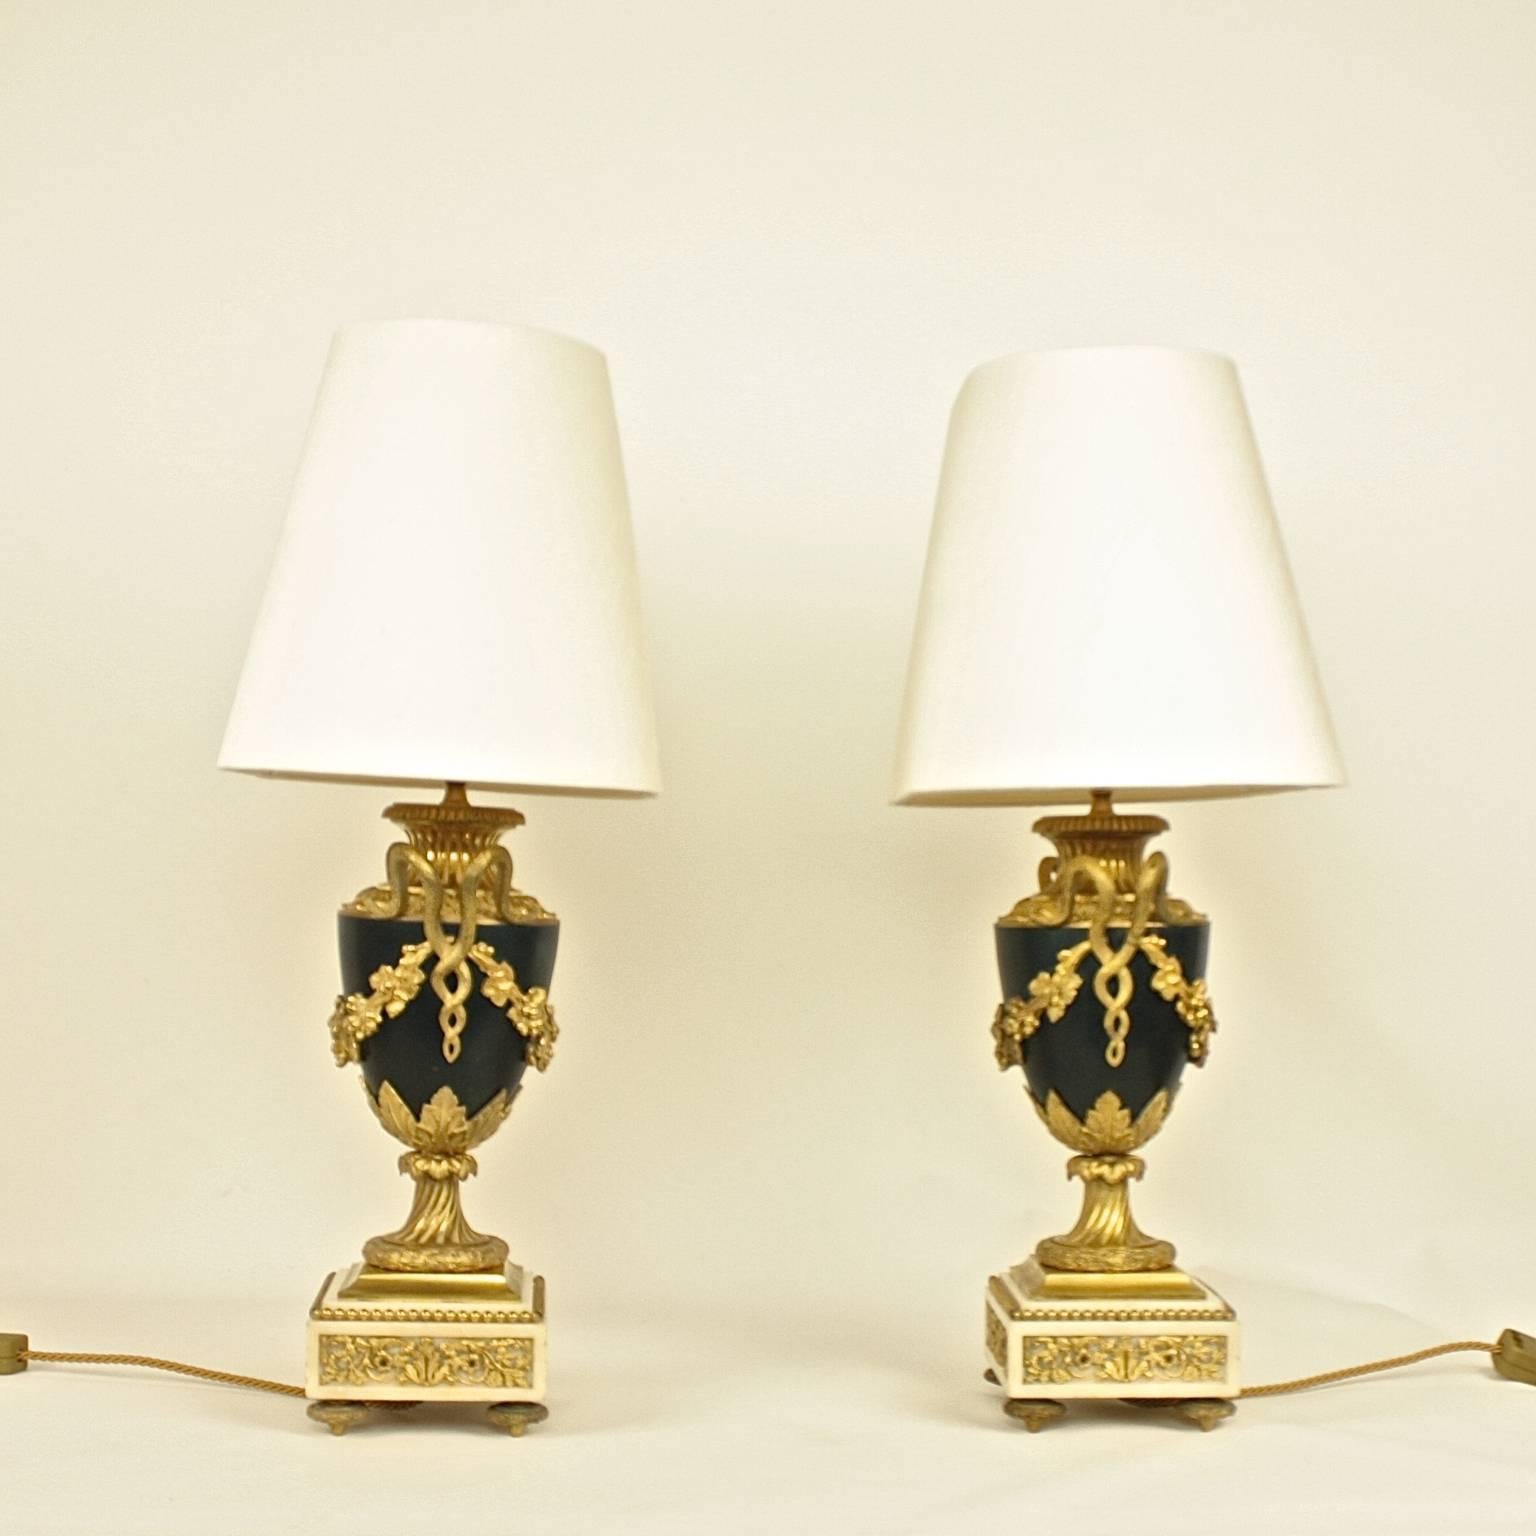 A pair of elegant early 19th century table lamps featuring Empire parcel-gilt bronze urns. The tapering dark green ovoid bodies flanked by serpent handles suspending wine swags, supported on stiff-leaf clasped waisted stems with laurel borders,